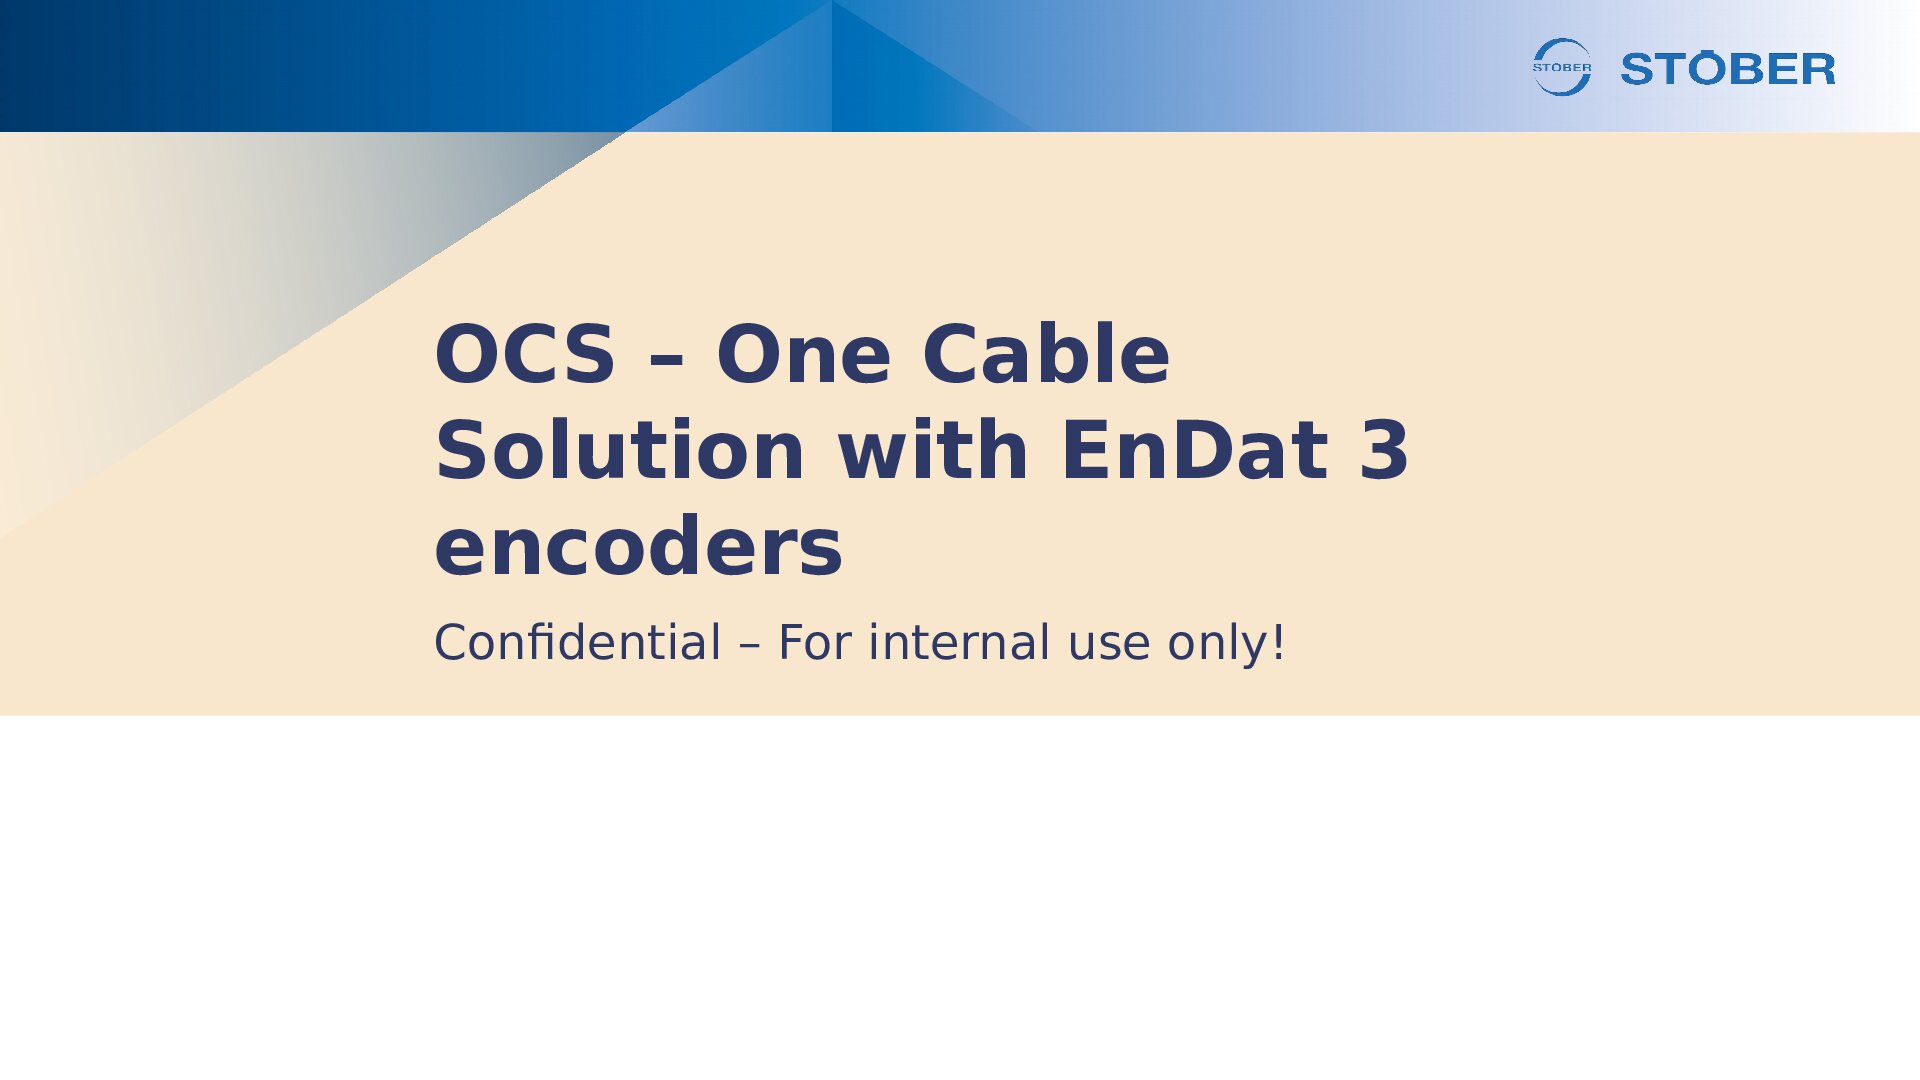 PP Technical Meeting OCS with EnDat 3 encoders